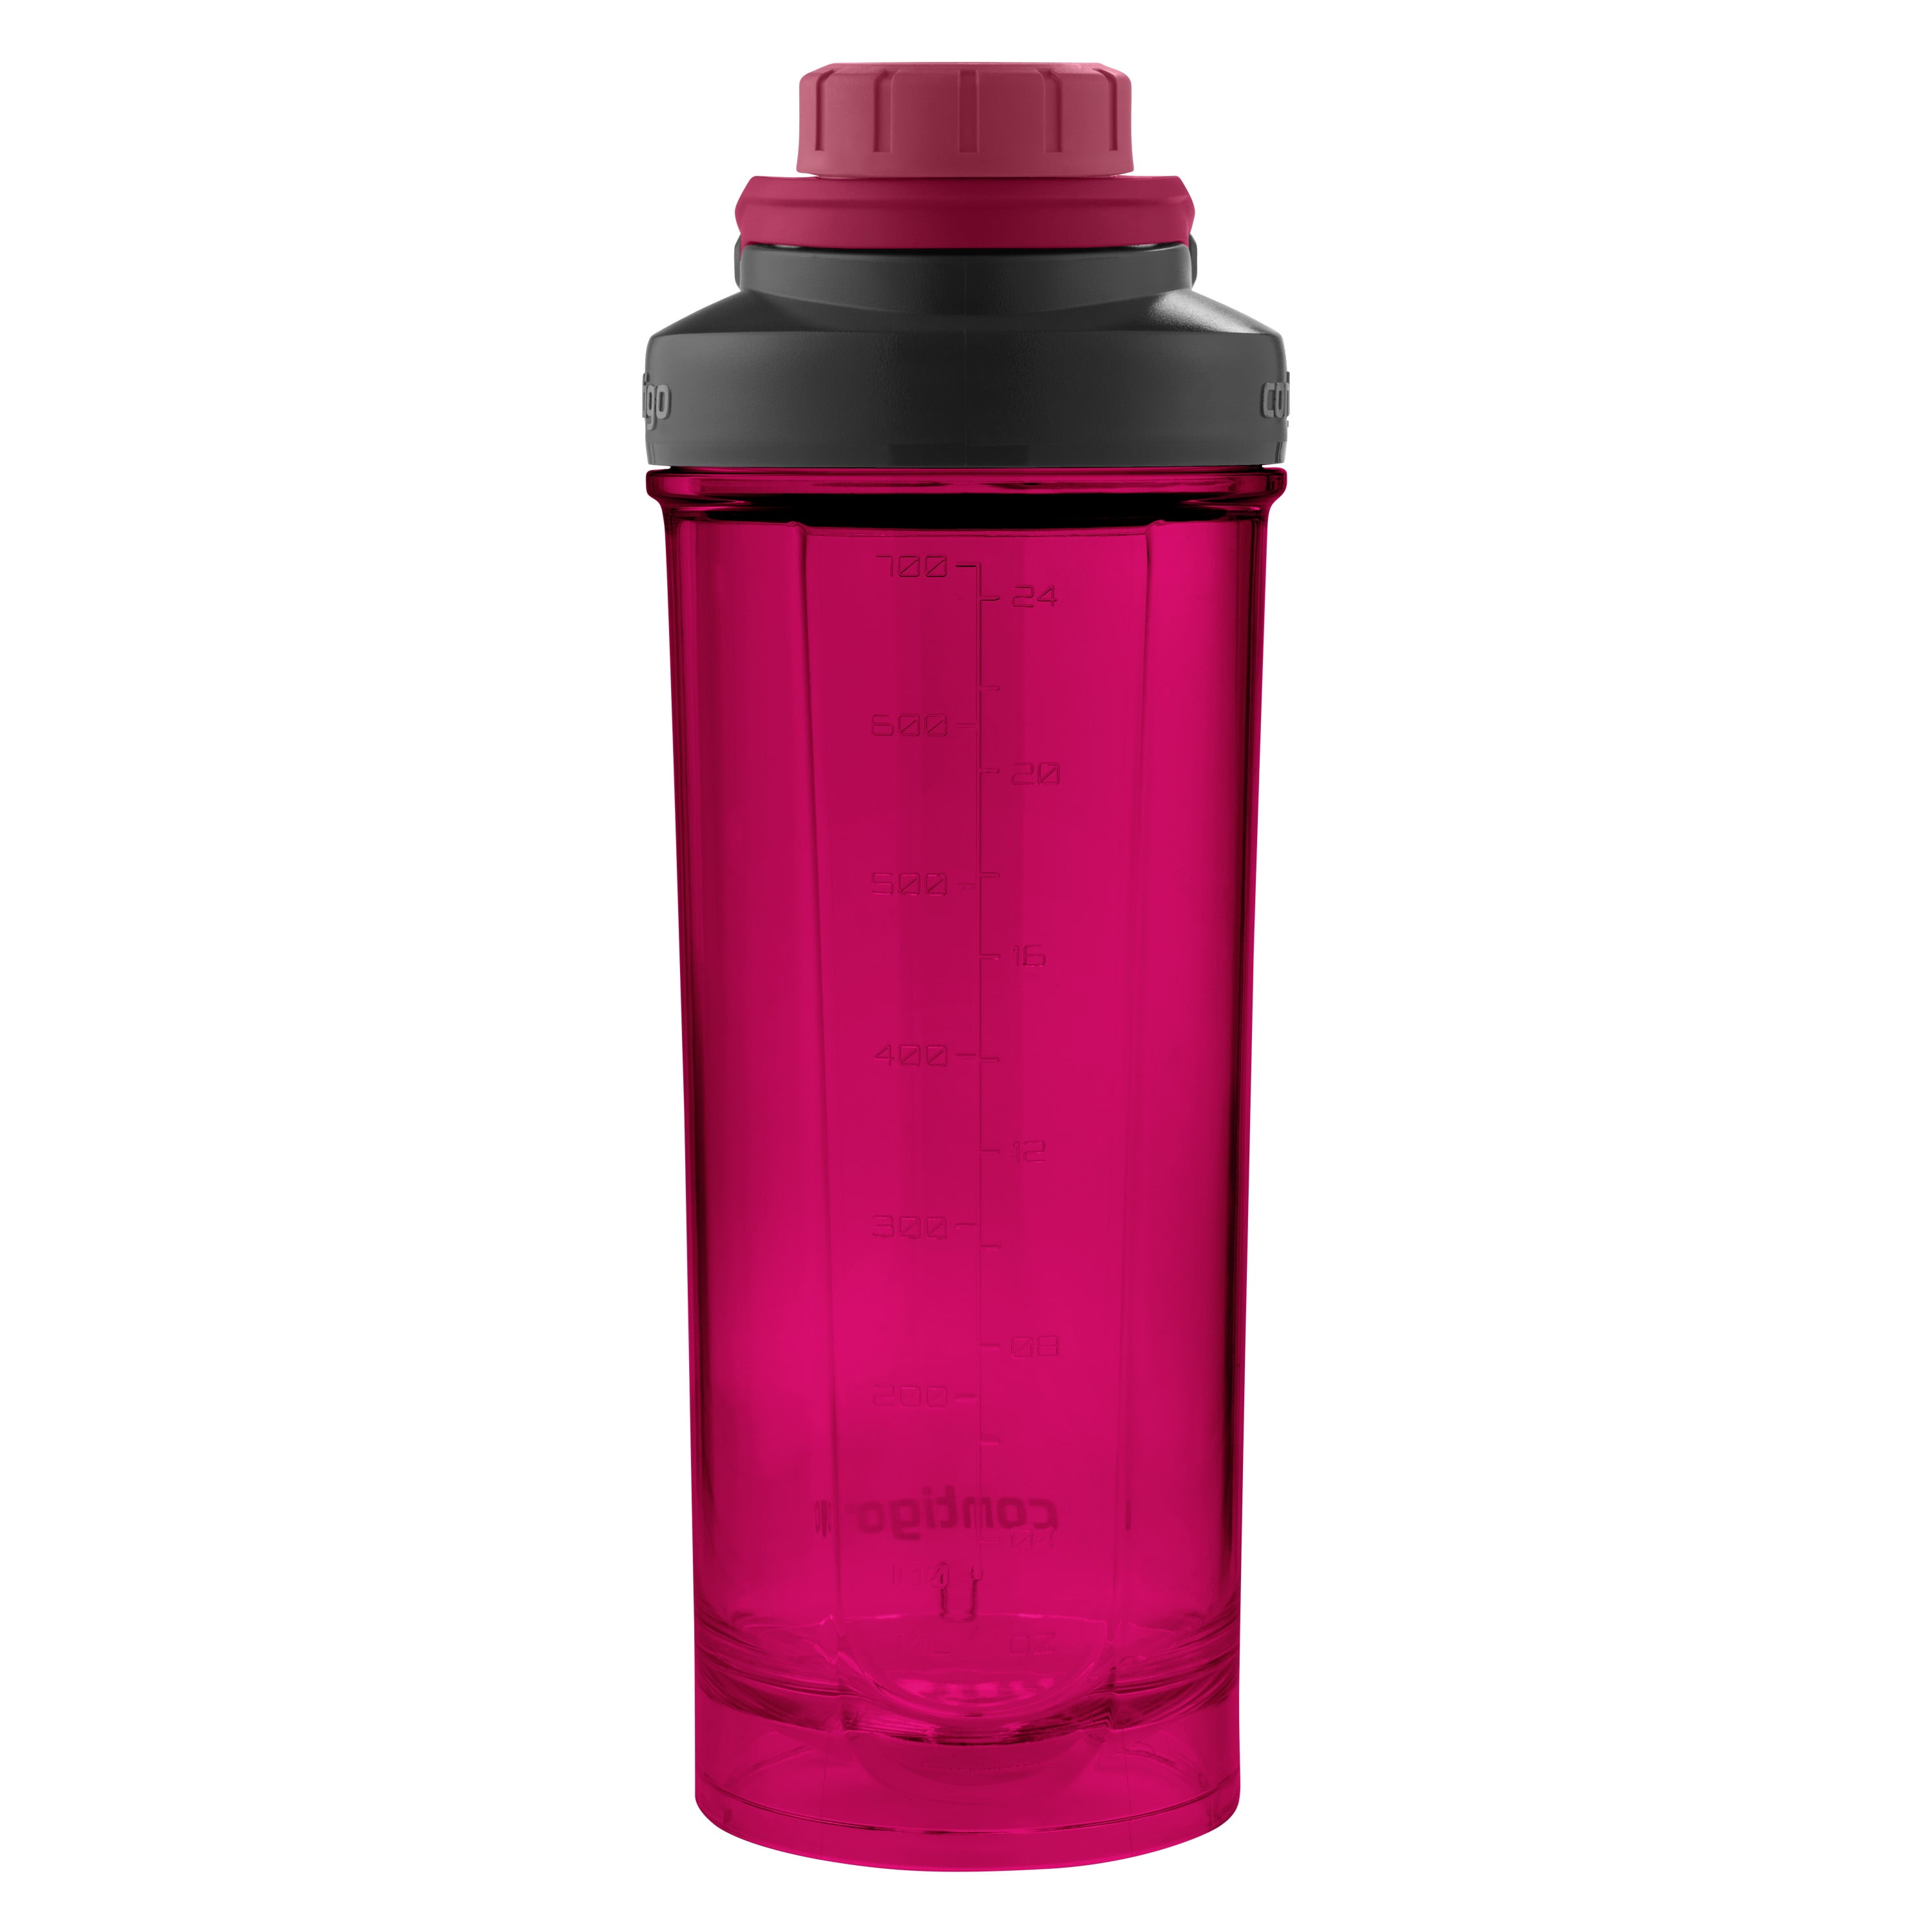 Free Soul Protein Shaker Bottle Pink with Mixball | Mini | BPA Free | Water  Bottle for Protein Shake…See more Free Soul Protein Shaker Bottle Pink